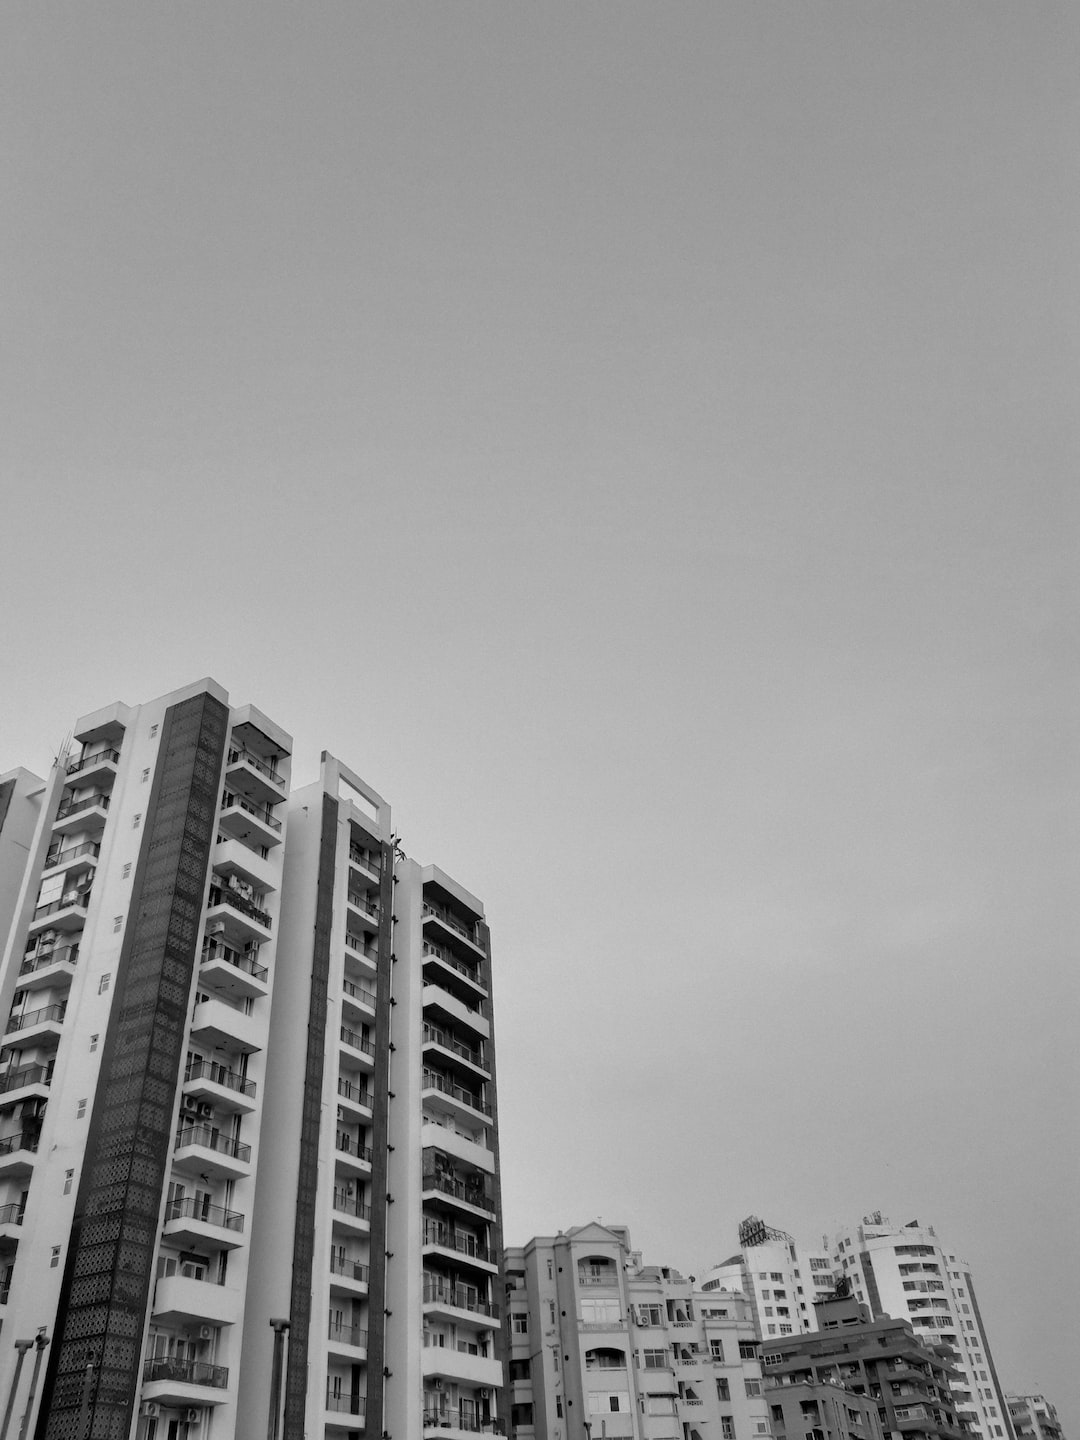 A black and white shot of buildings - apartments.